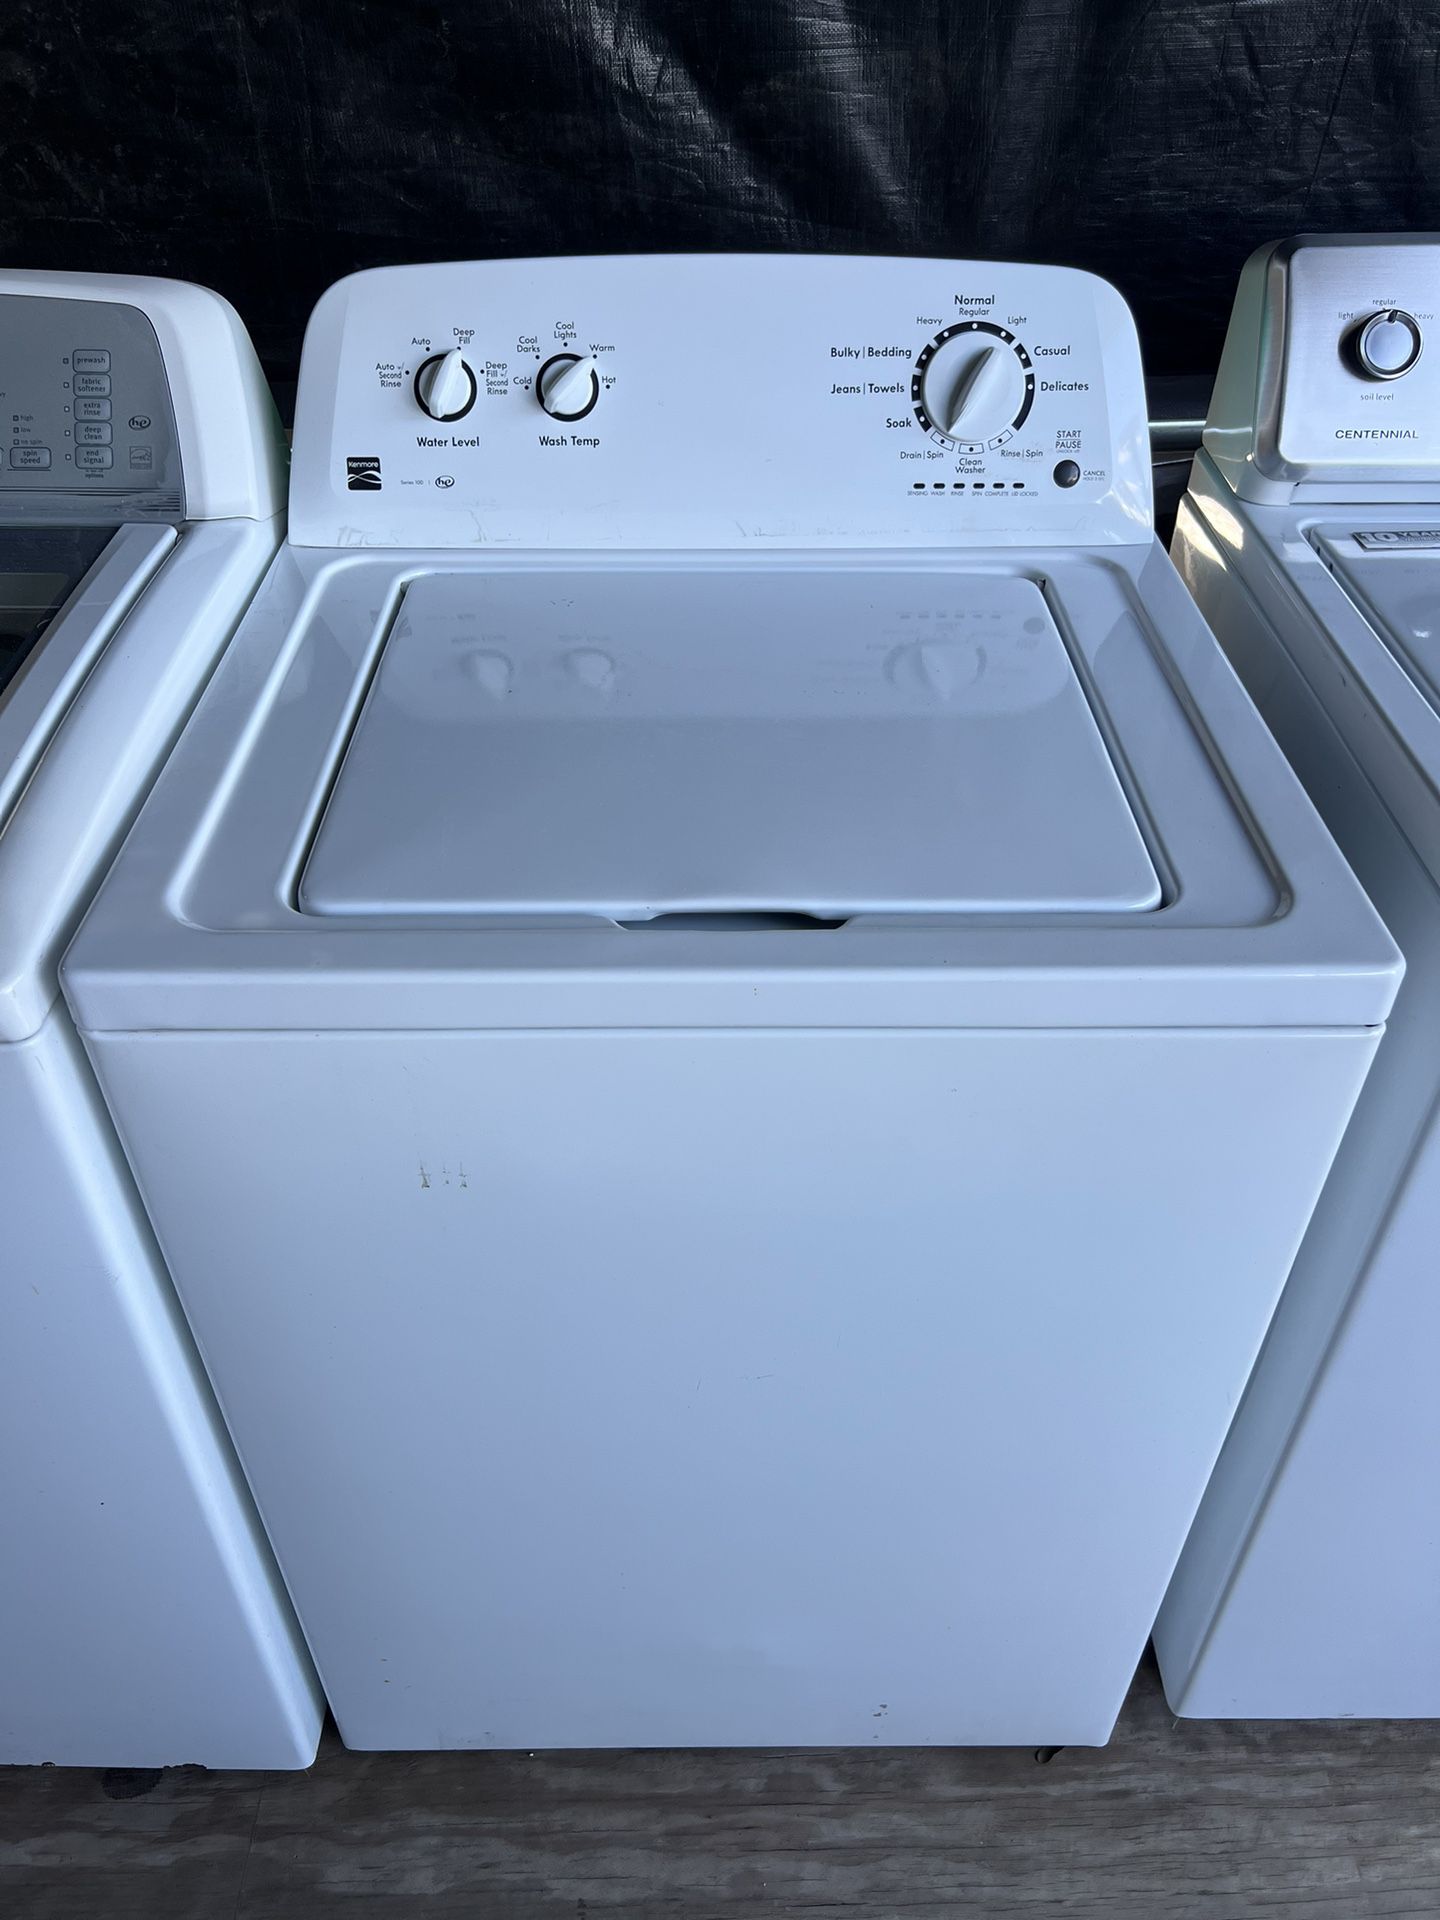 Kenmore Single Washer 60 day warranty/ Located at:📍5415 Carmack Rd Tampa Fl 33610📍